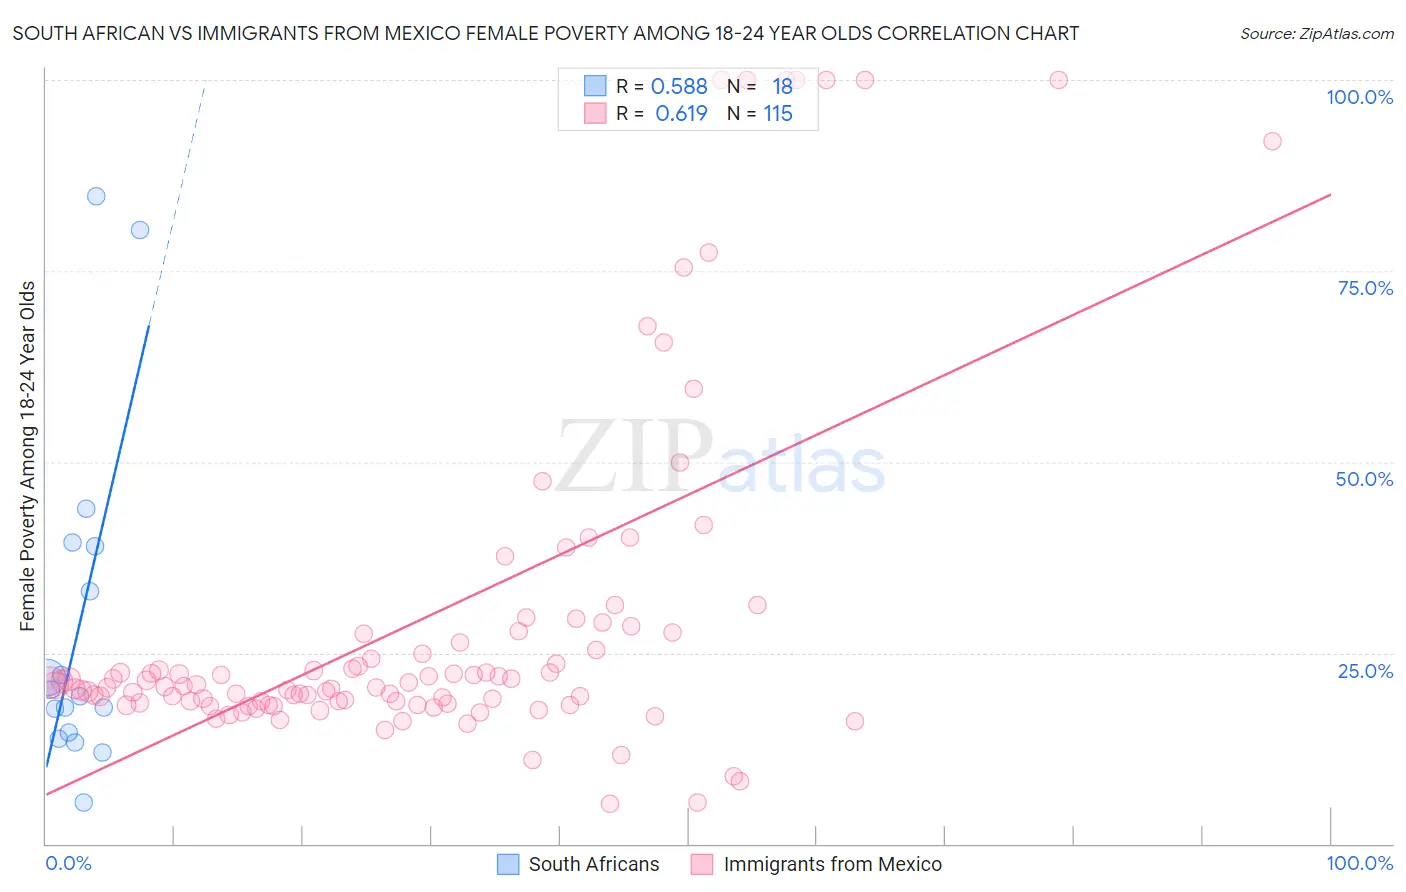 South African vs Immigrants from Mexico Female Poverty Among 18-24 Year Olds